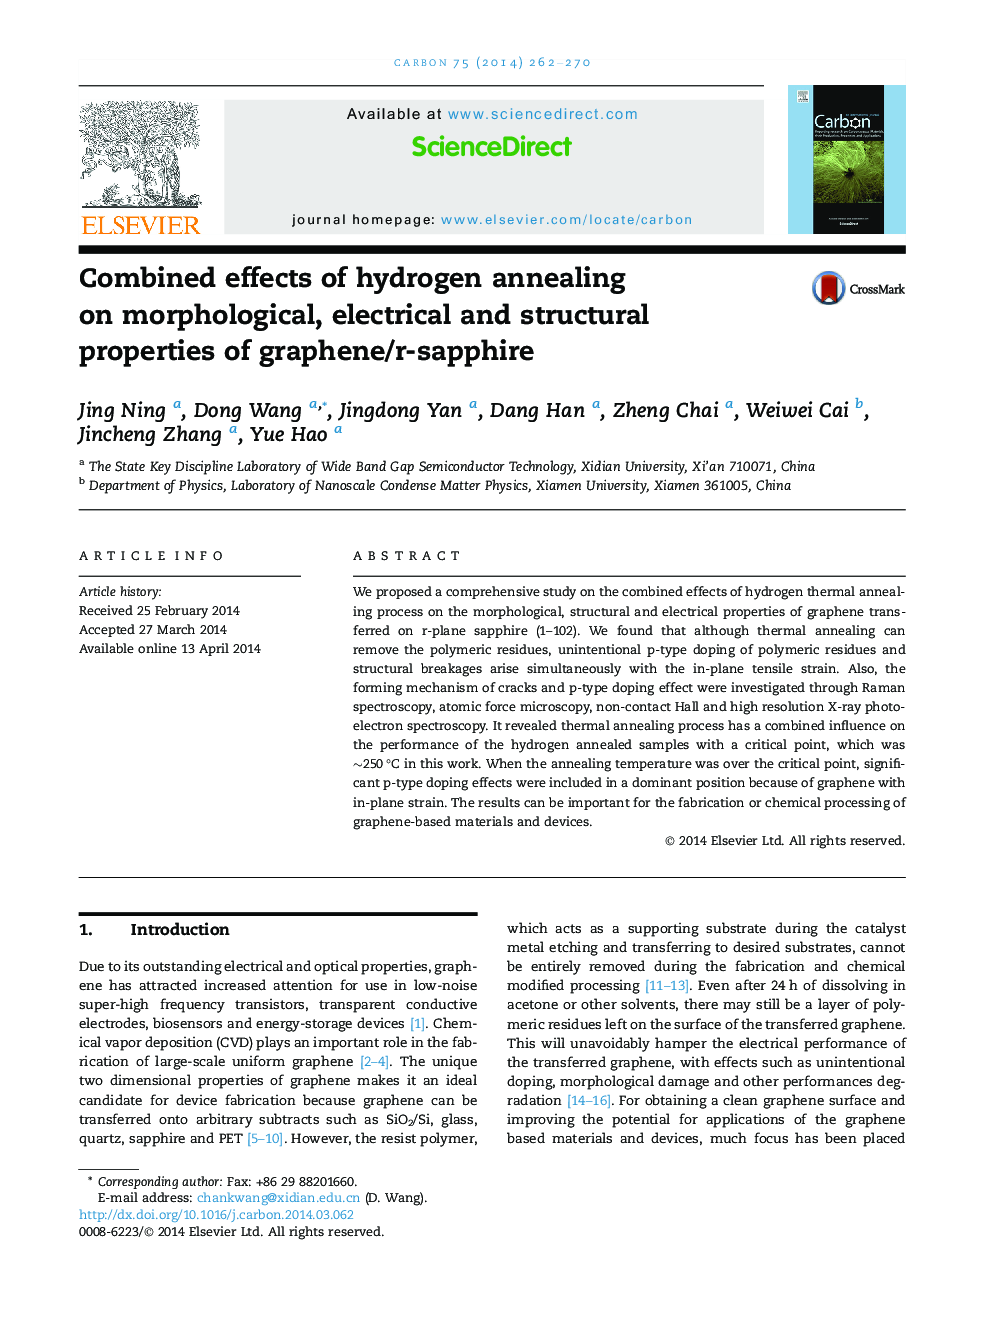 Combined effects of hydrogen annealing on morphological, electrical and structural properties of graphene/r-sapphire